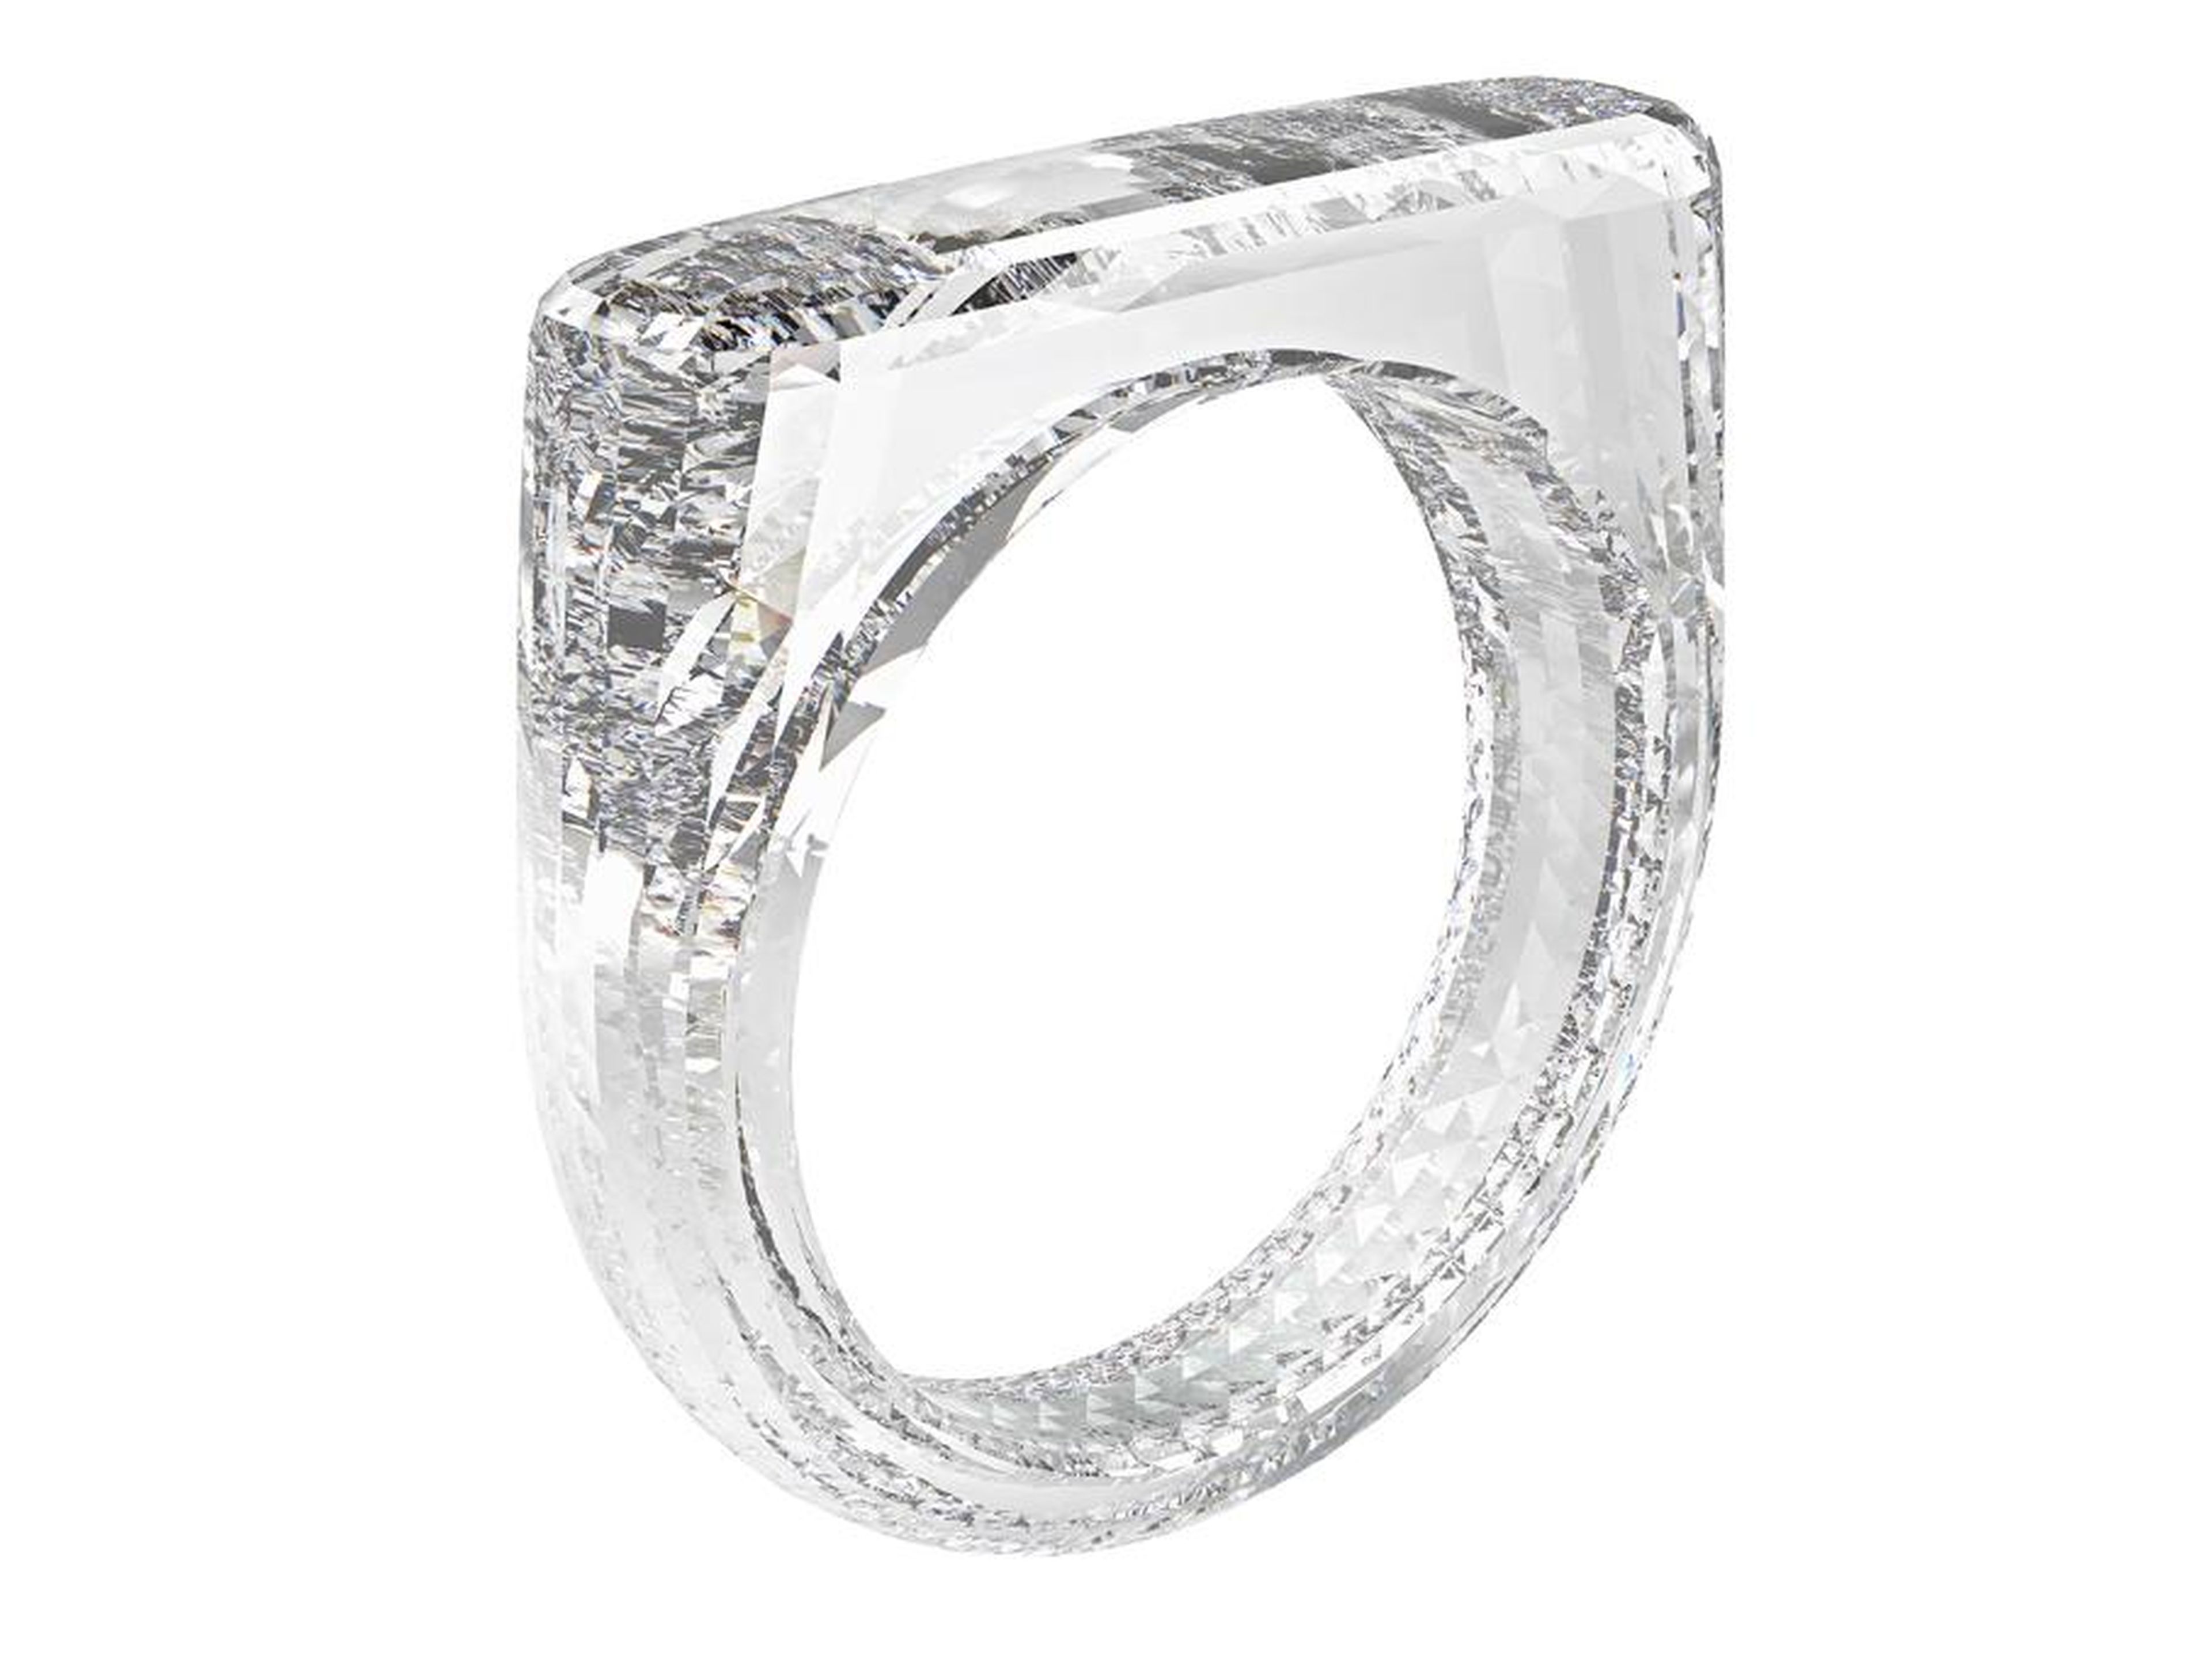 With designer Marc Newson, Ive helped design several products for a charity auction, including this $250,000 ring made entirely out of a single chunk of diamonds.